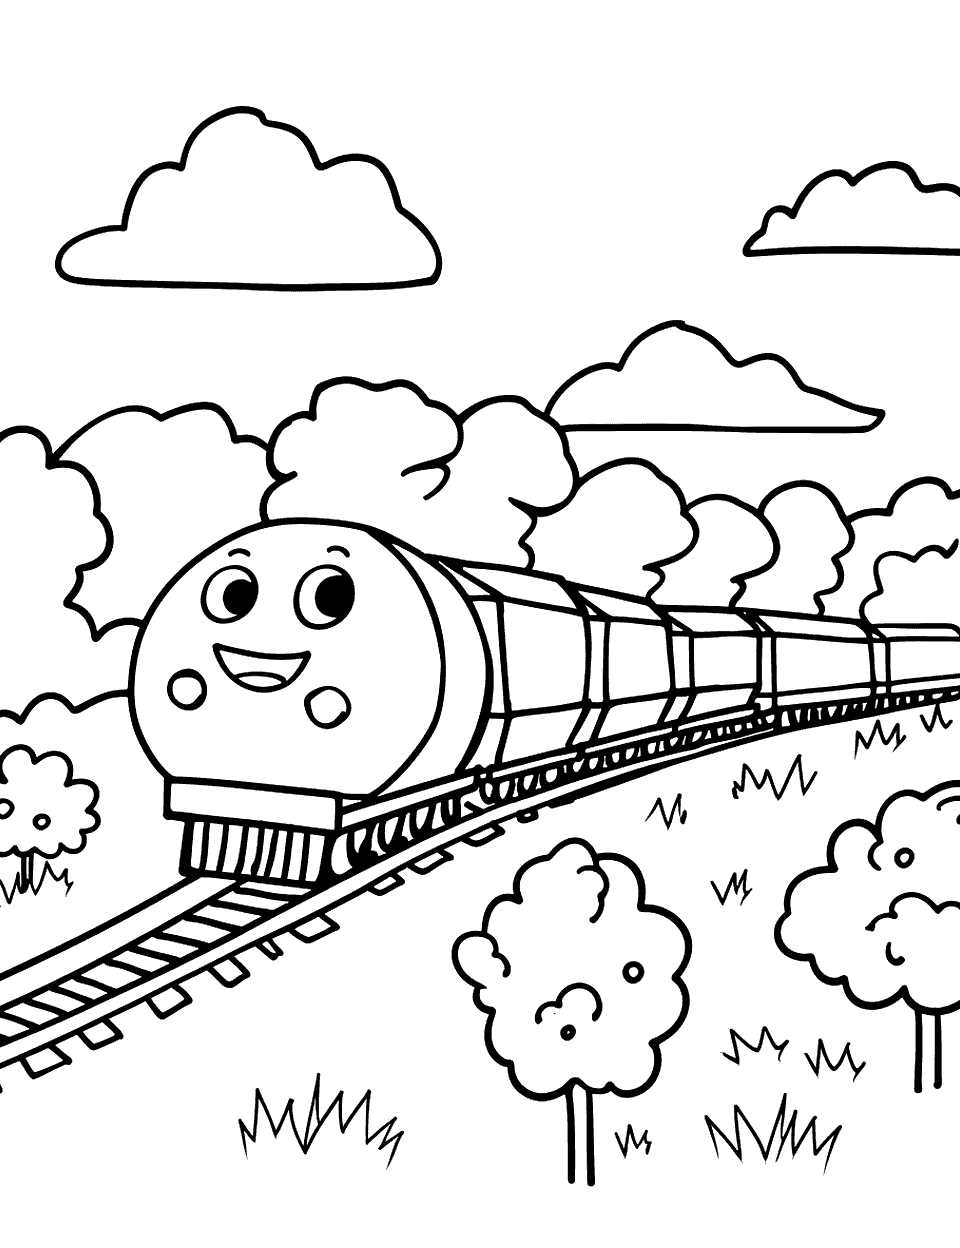 Rectangle Railway Shapes Coloring Page - A train with rectangular cars chugging along a simple track through the countryside.